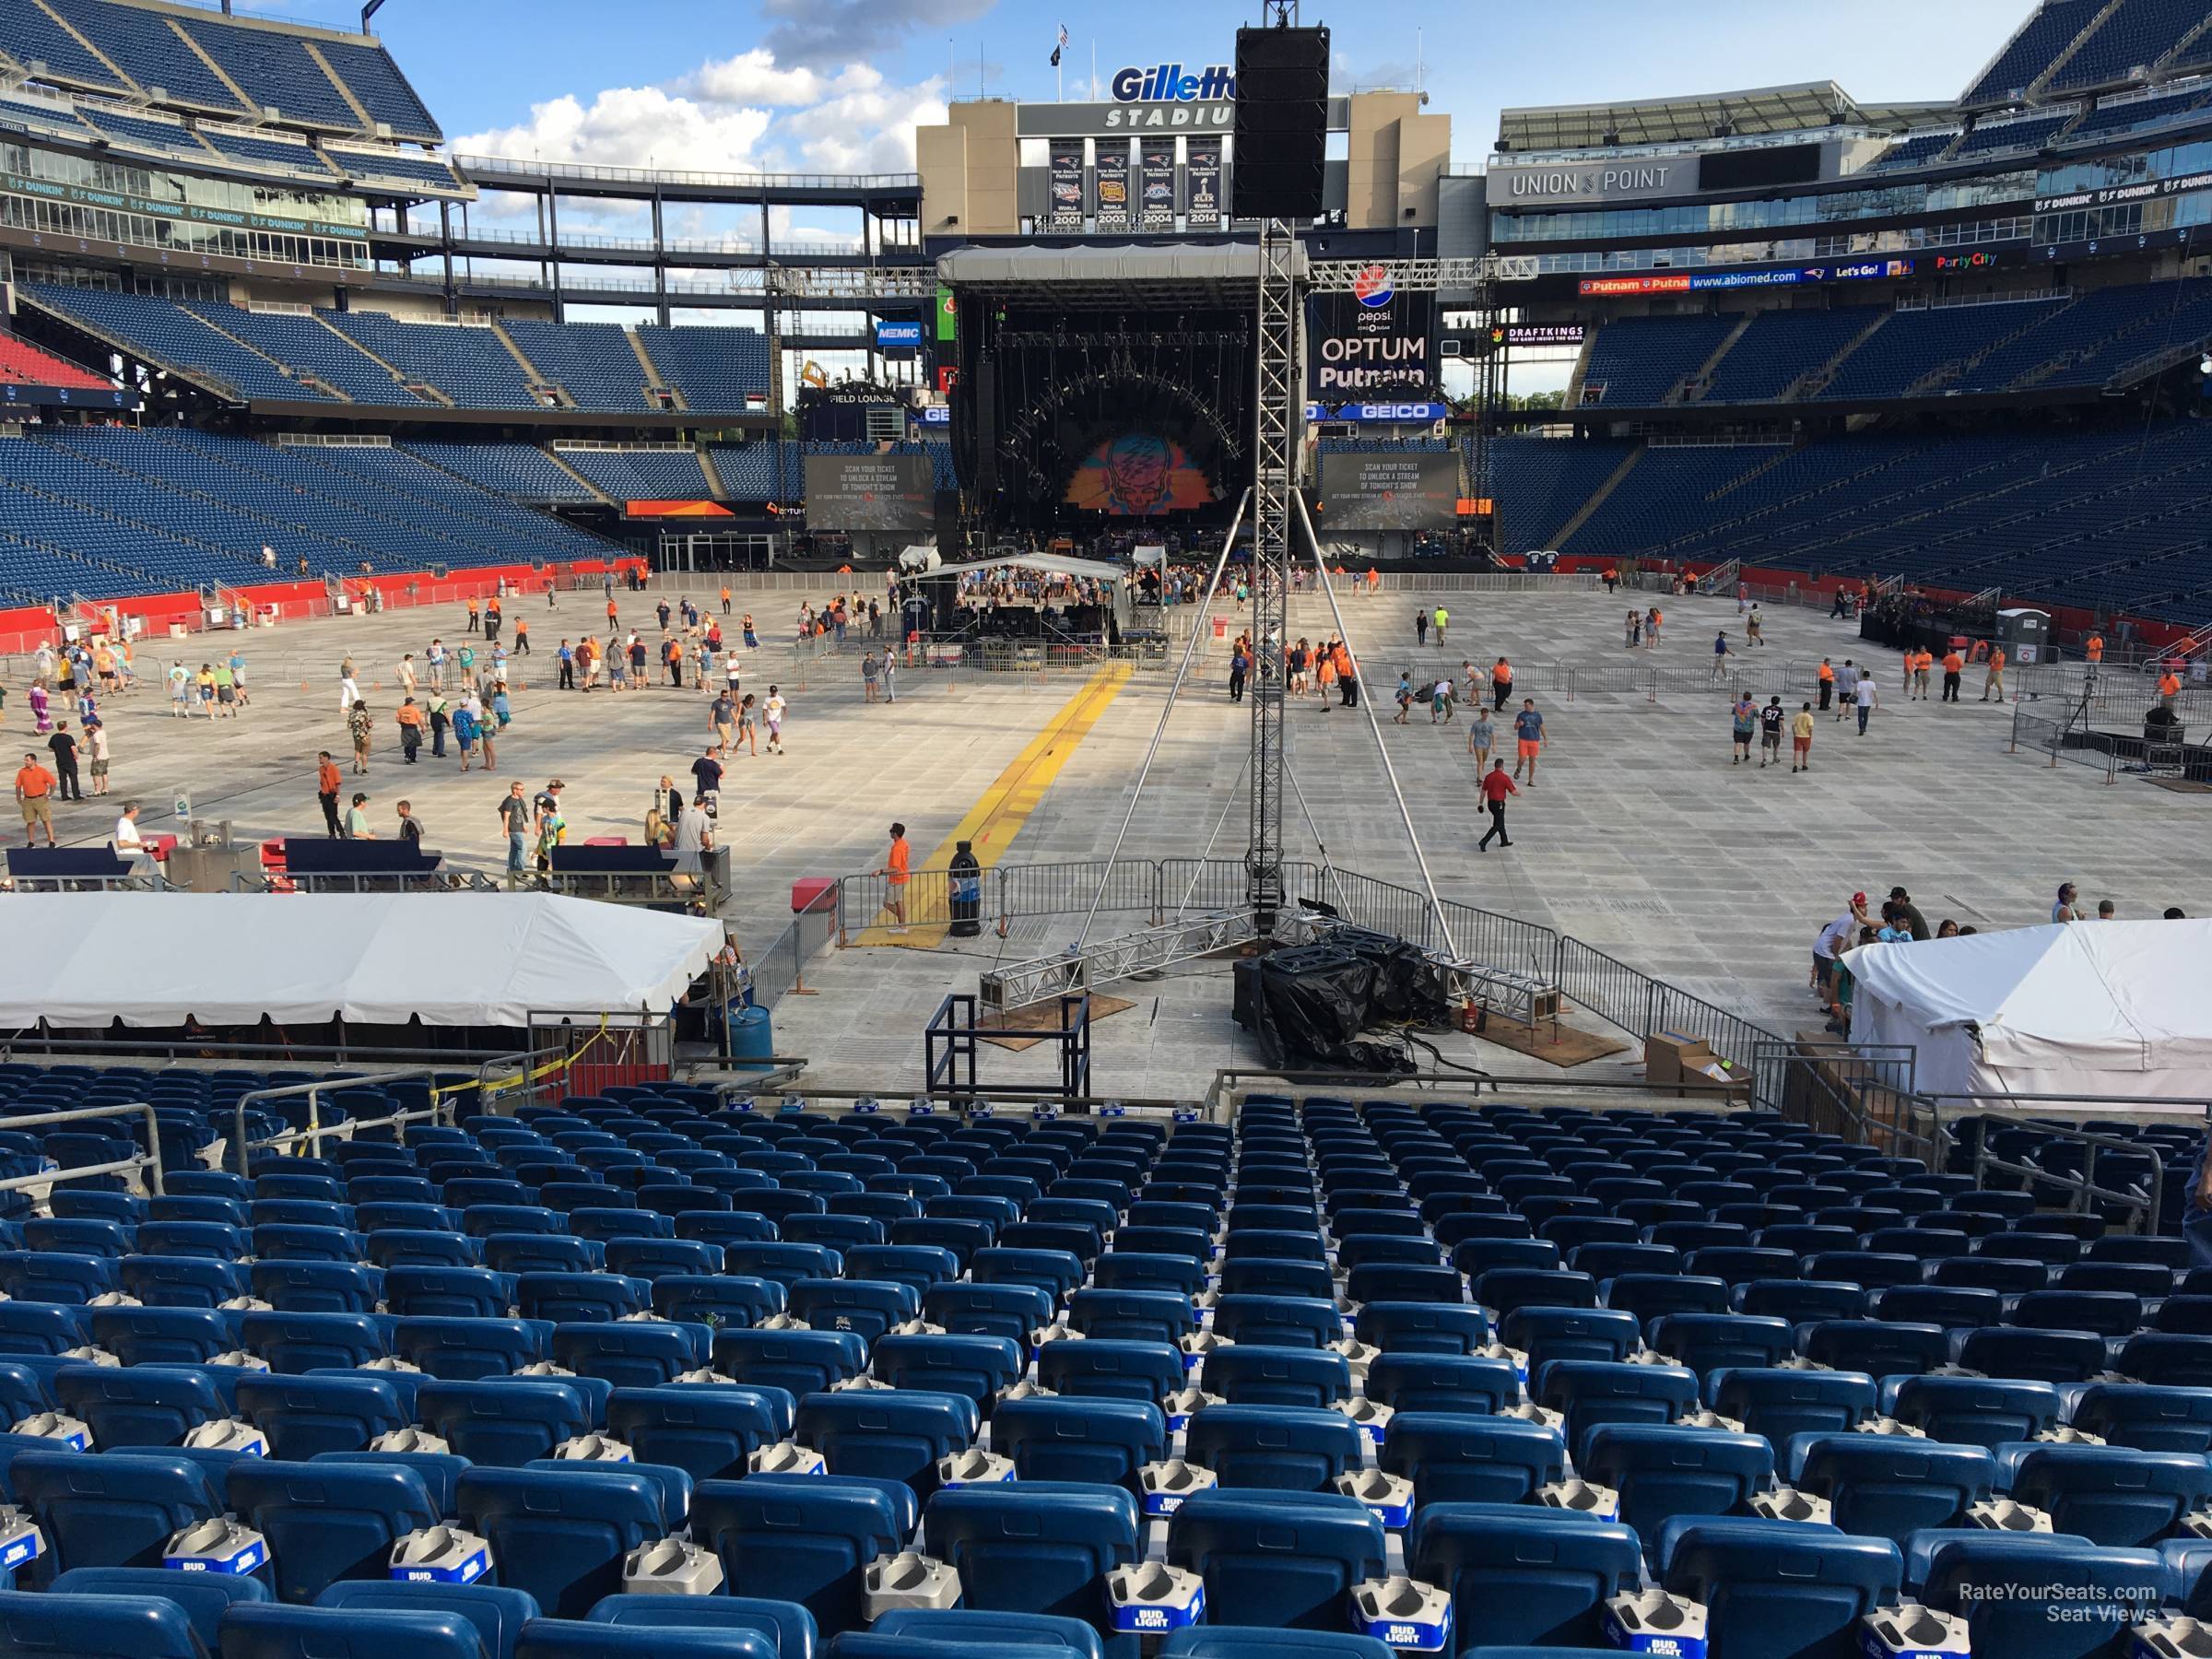 Gillette Stadium Section 142 Concert Seating - RateYourSeats.com